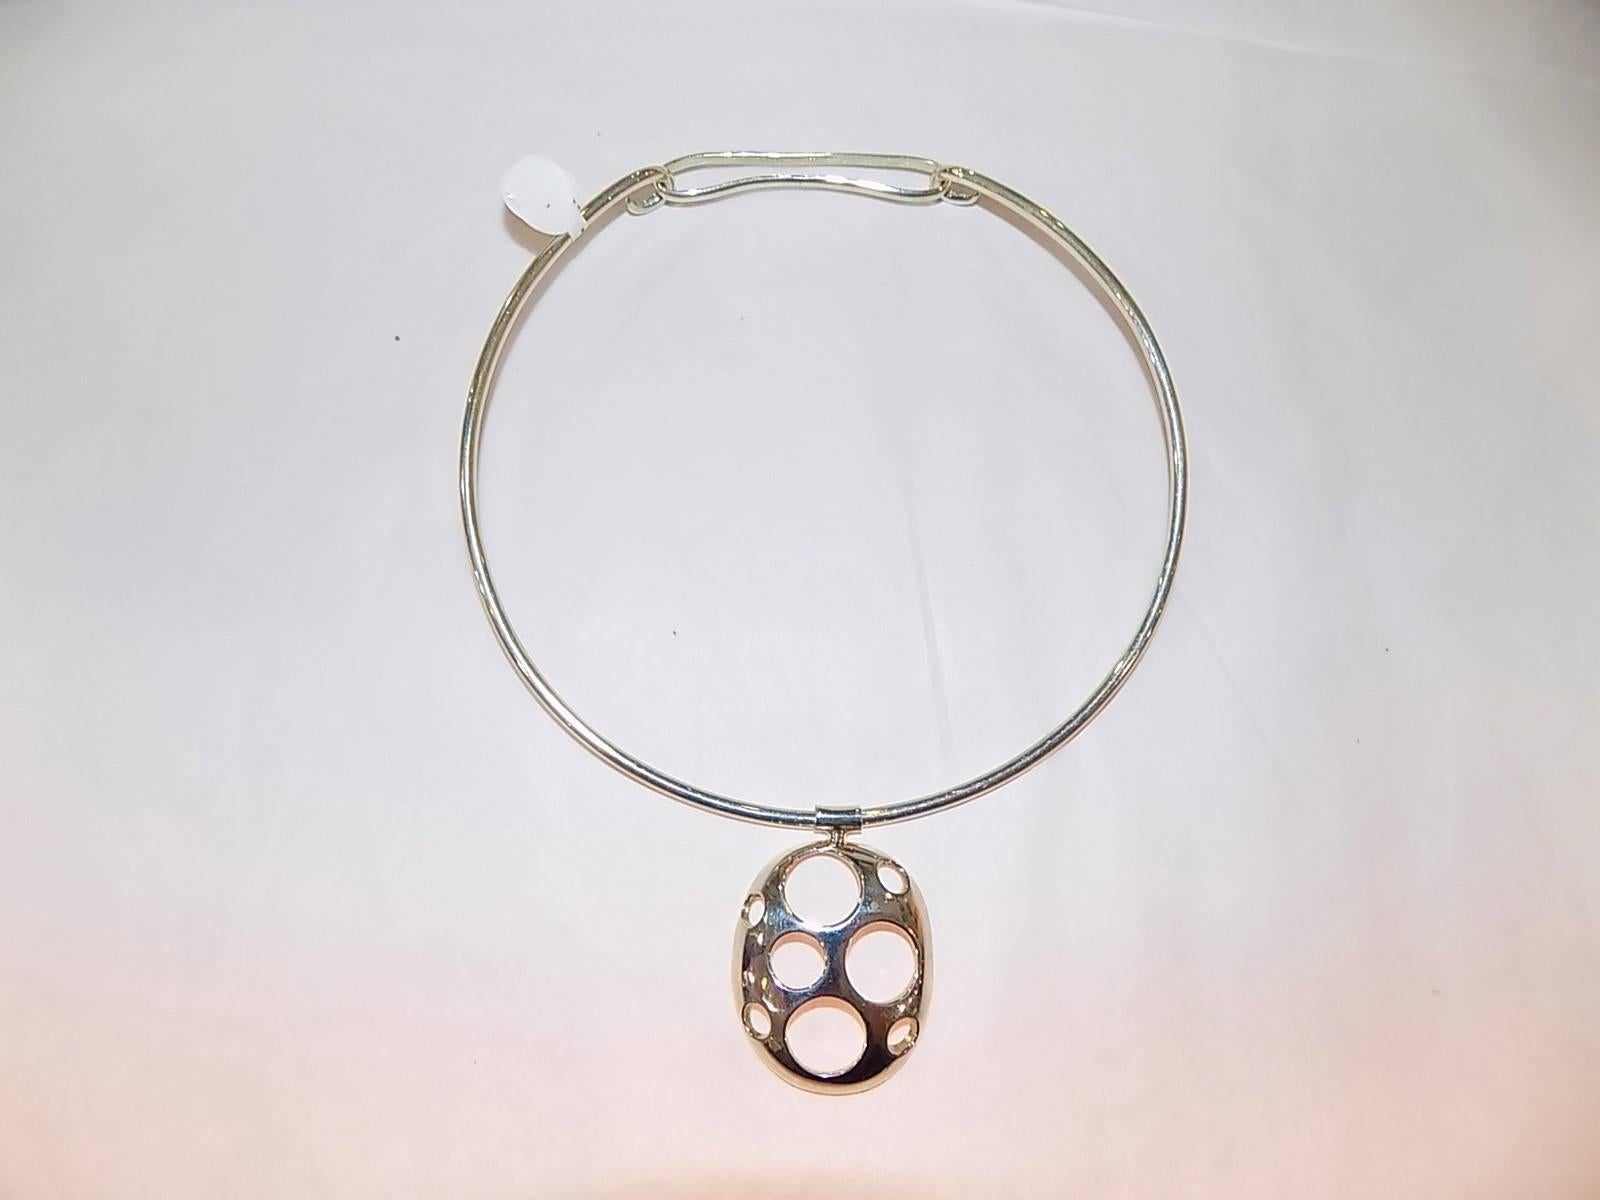 Bill Schiffer    One of a kind vintage signed Silver Chocker necklace with lunar pendant.  Solid stealing silver.  Circa 1980